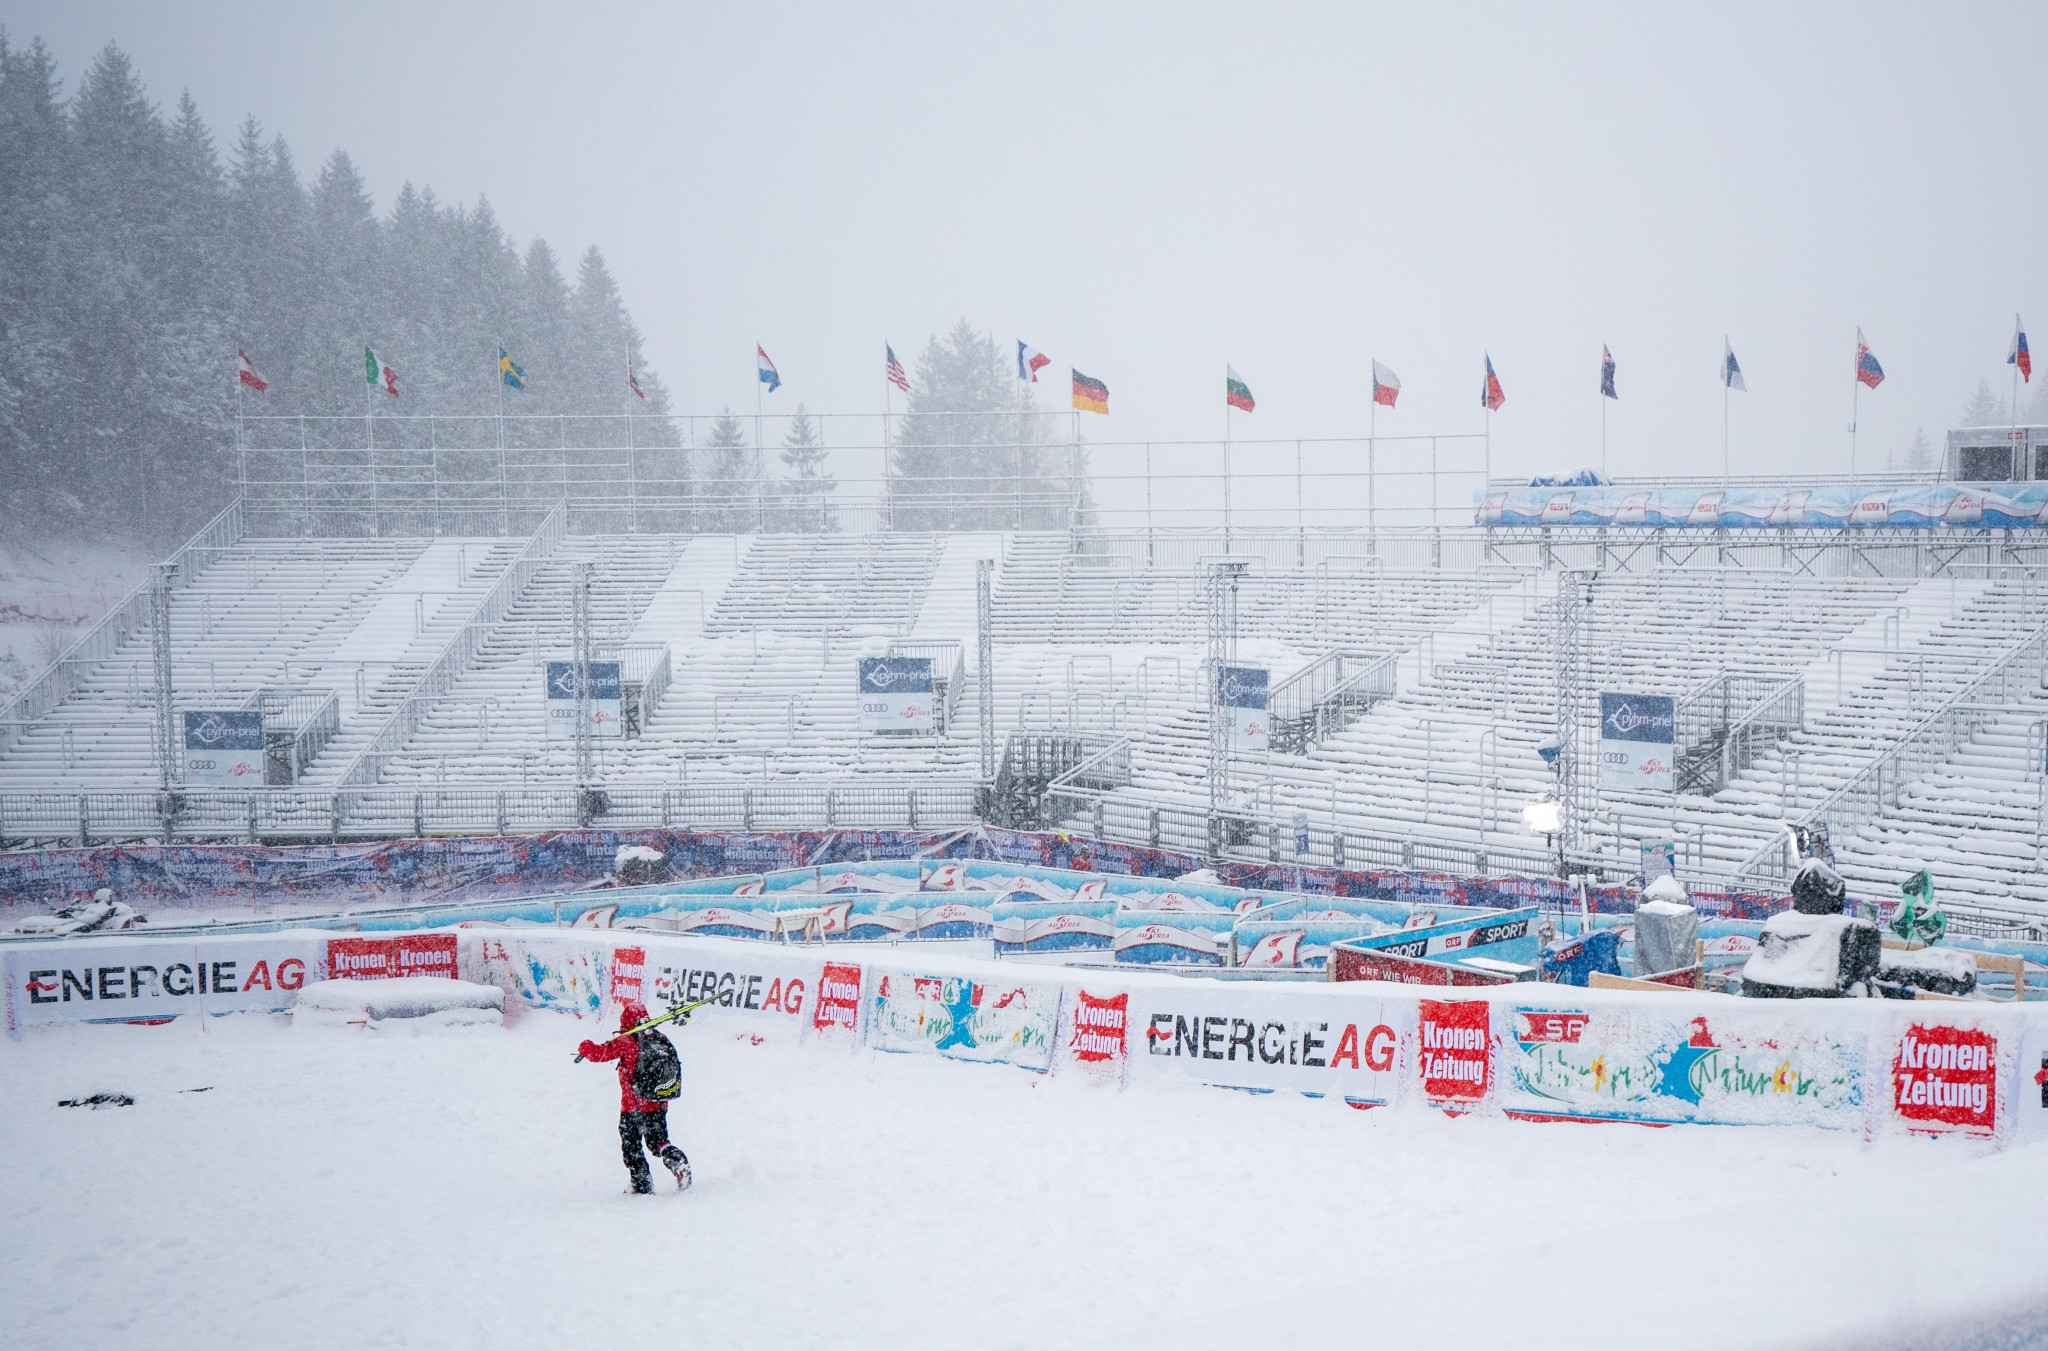 Snow and rain caused the FIS Alpine Skiing World Cup combined event in Hinterstoder to be rescheduled ©Getty Images